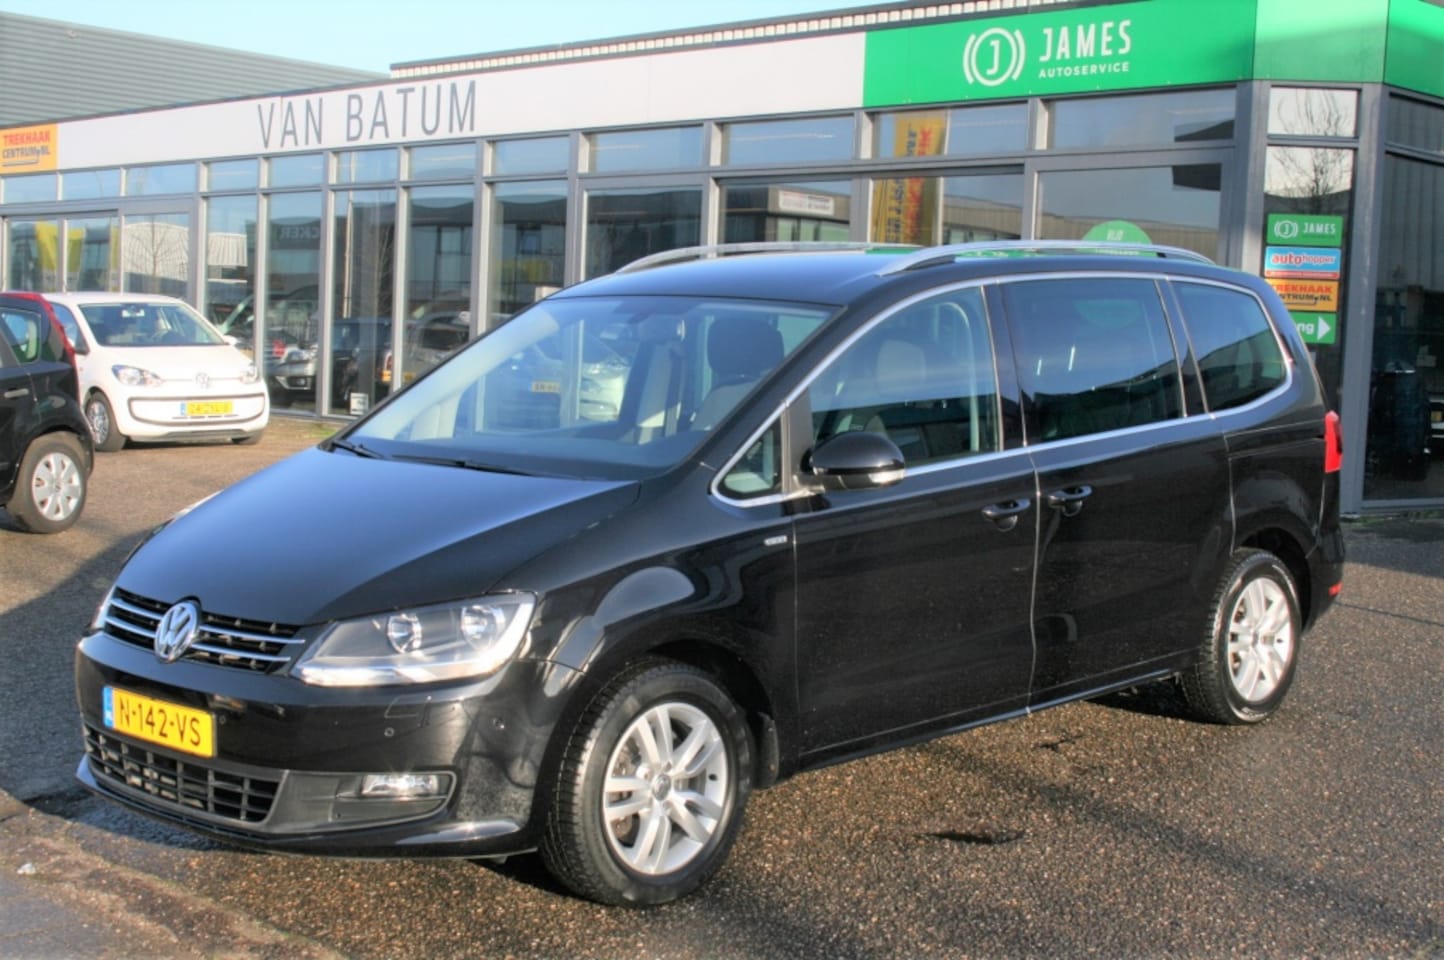 Buskruit Vooraf Verwachten volkswagen sharan netherlands used – Search for your used car on the parking